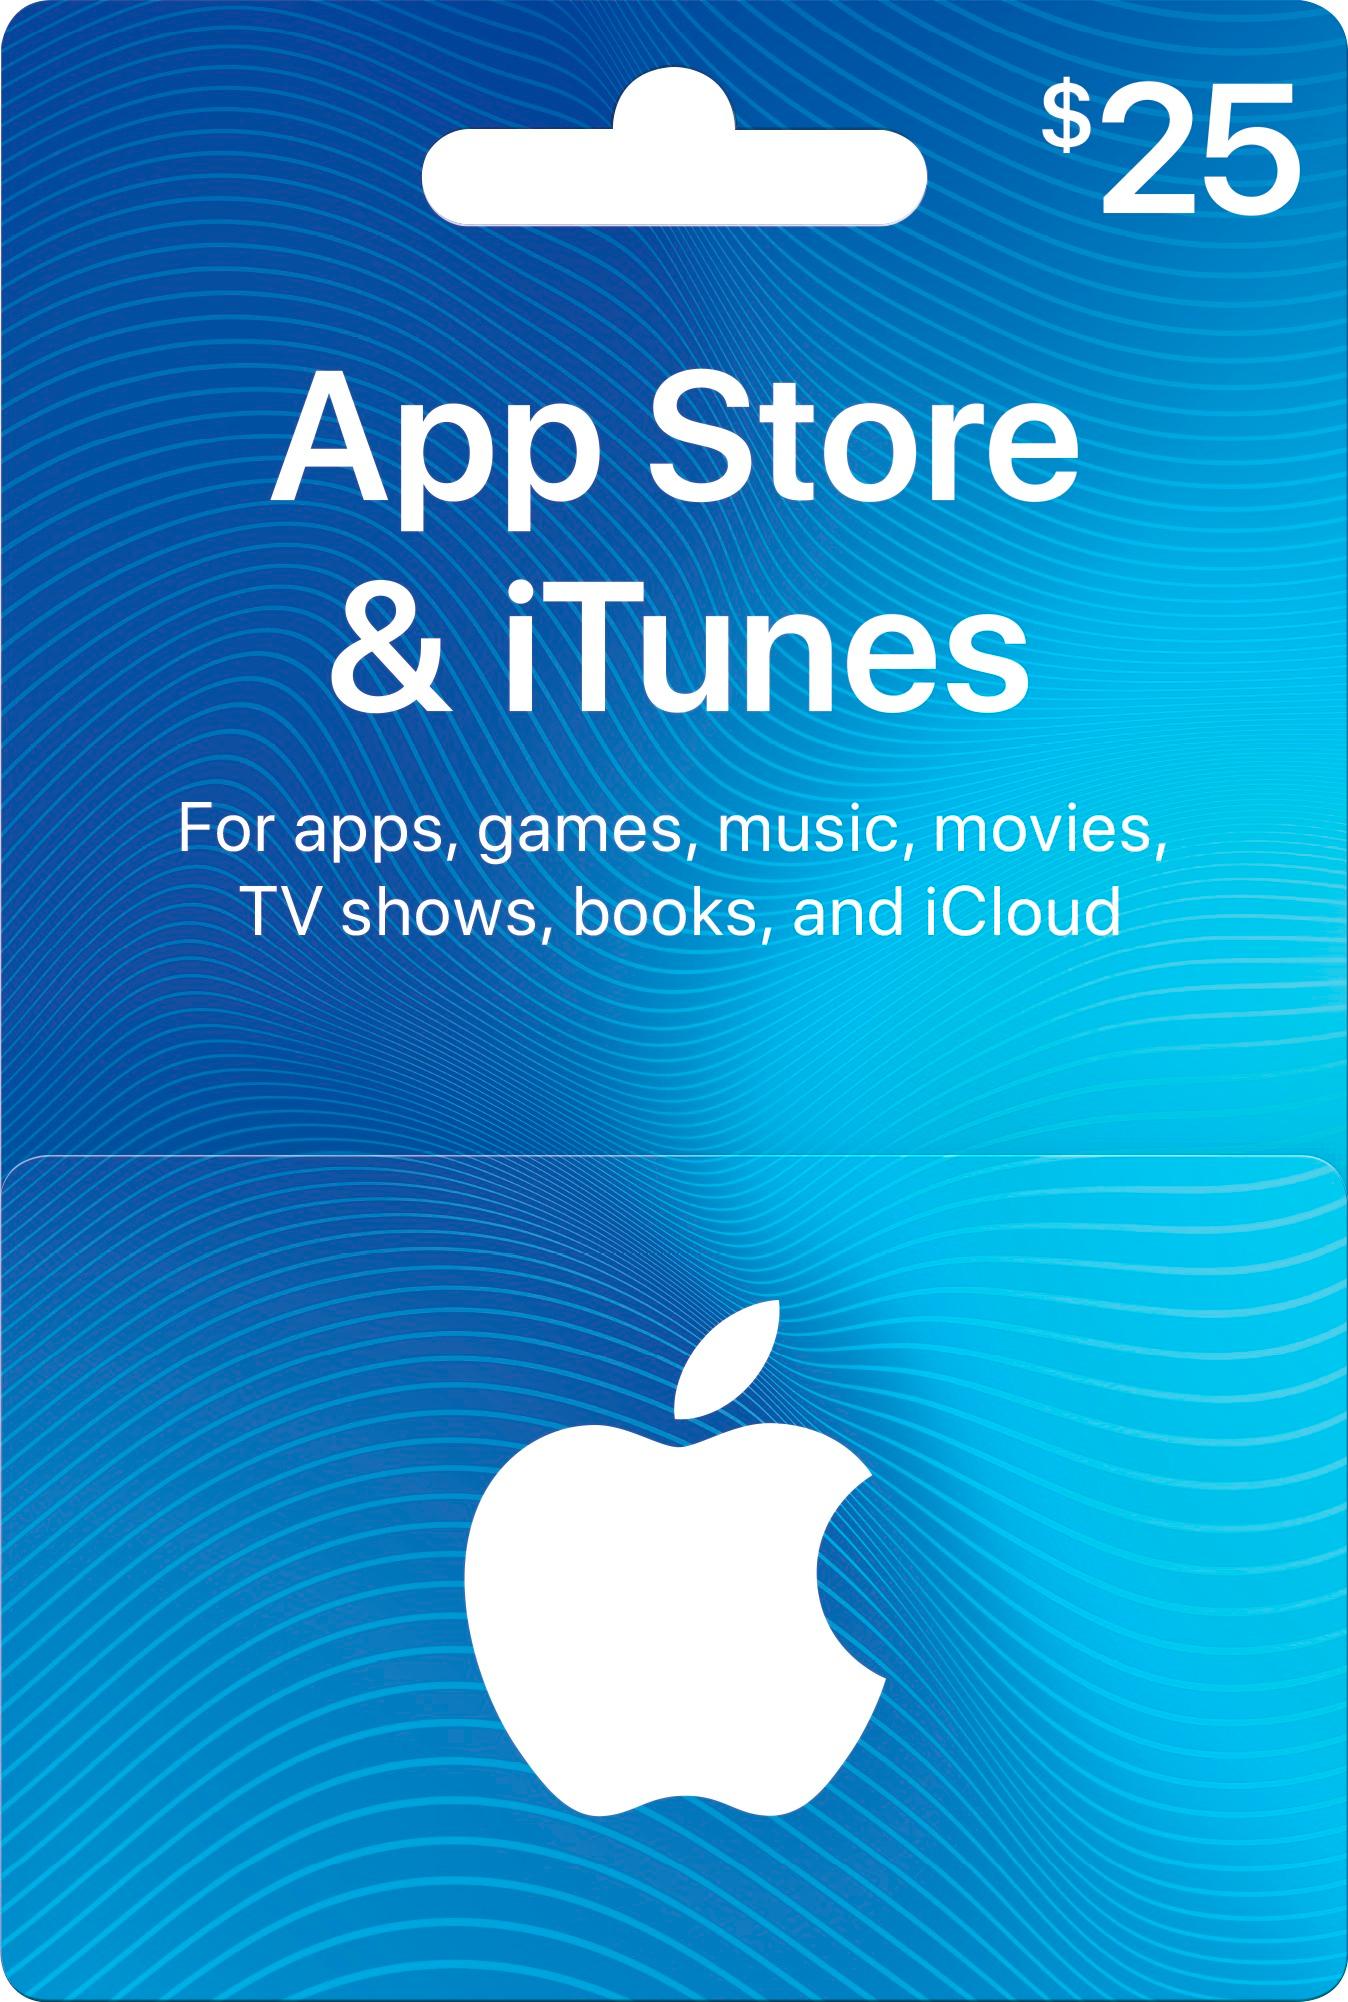 Apple - $25 App Store & iTunes Gift Card